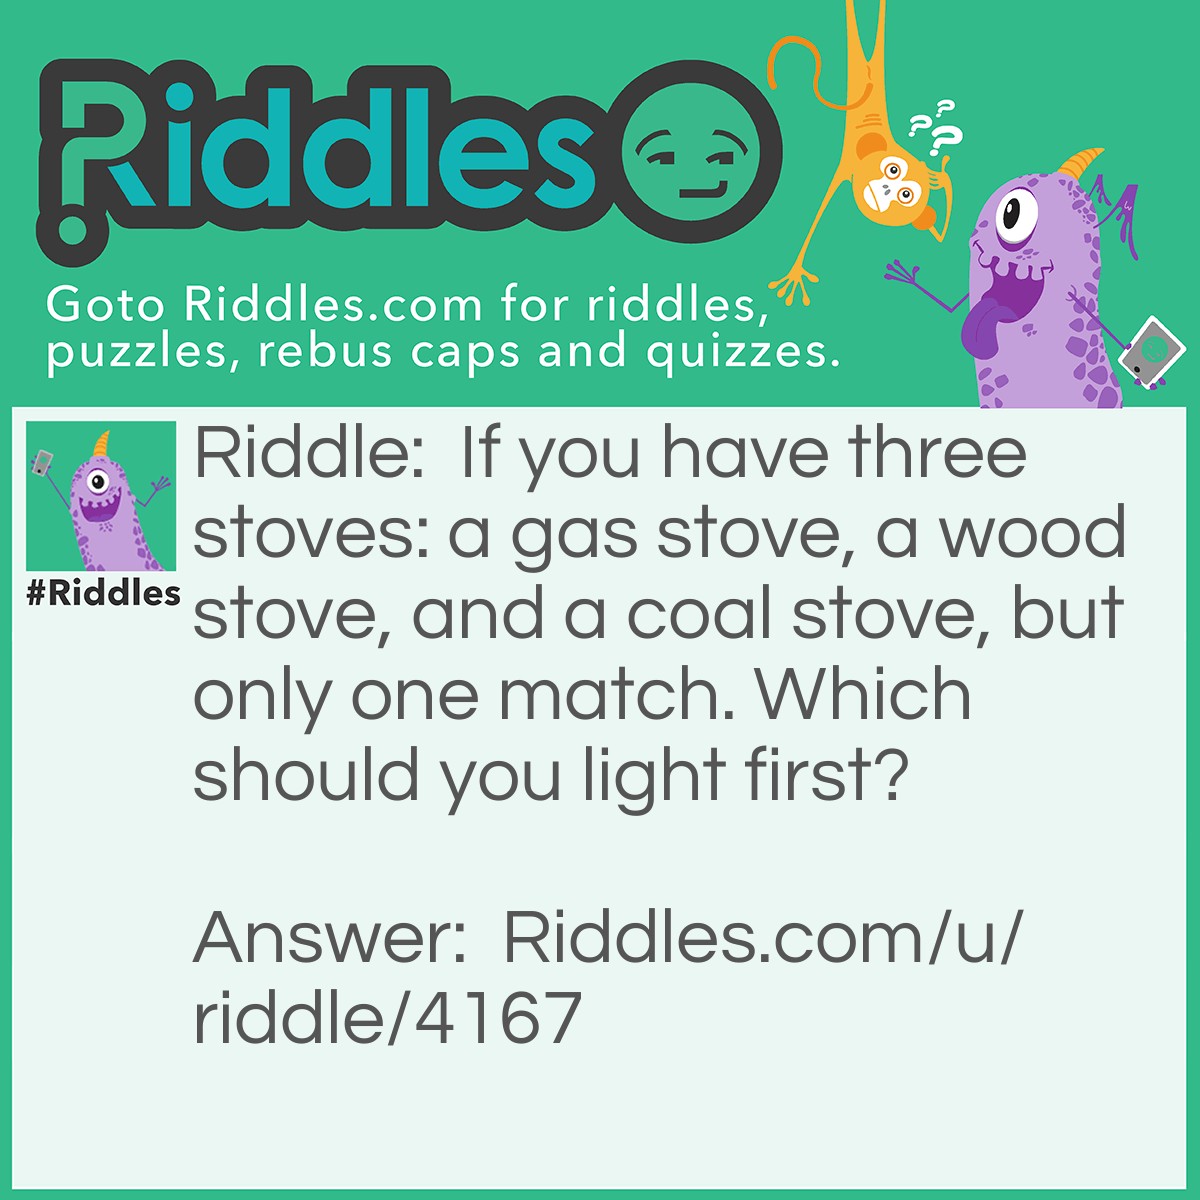 Riddle: If you have three stoves: a gas stove, a wood stove, and a coal stove, but only one match. Which should you light first? Answer: The match.